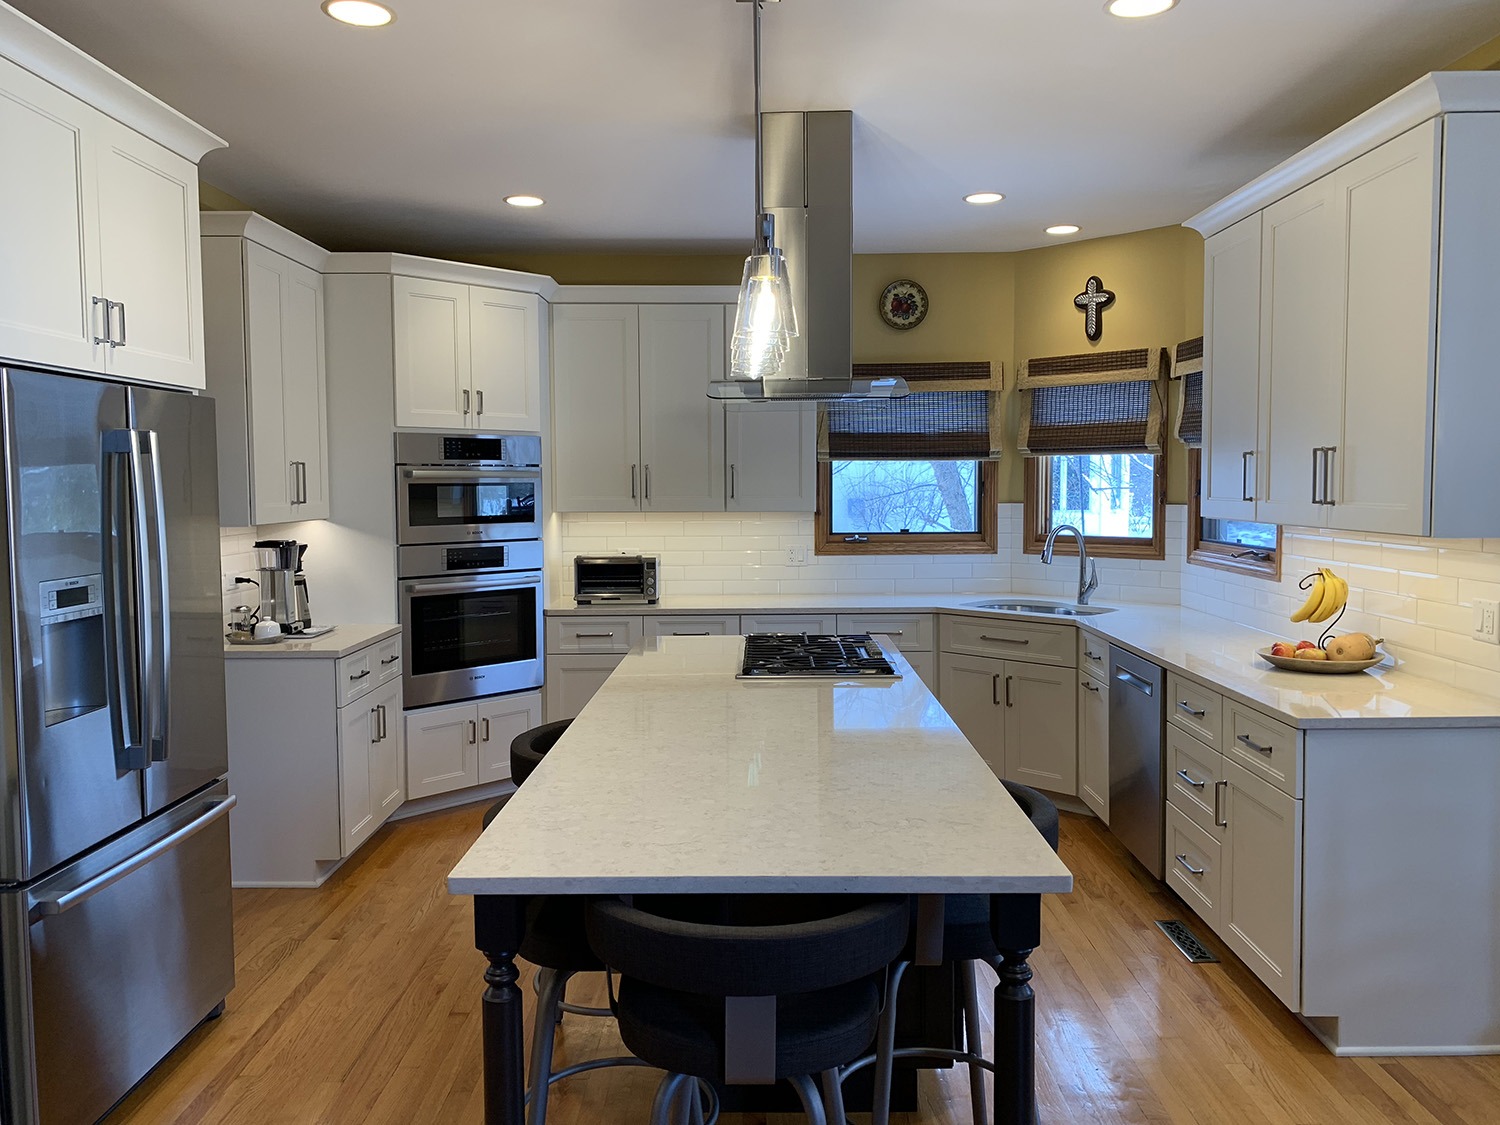 kitchen remodel long white island with stovetop and vent stainless steel recess lighting chrome hardware